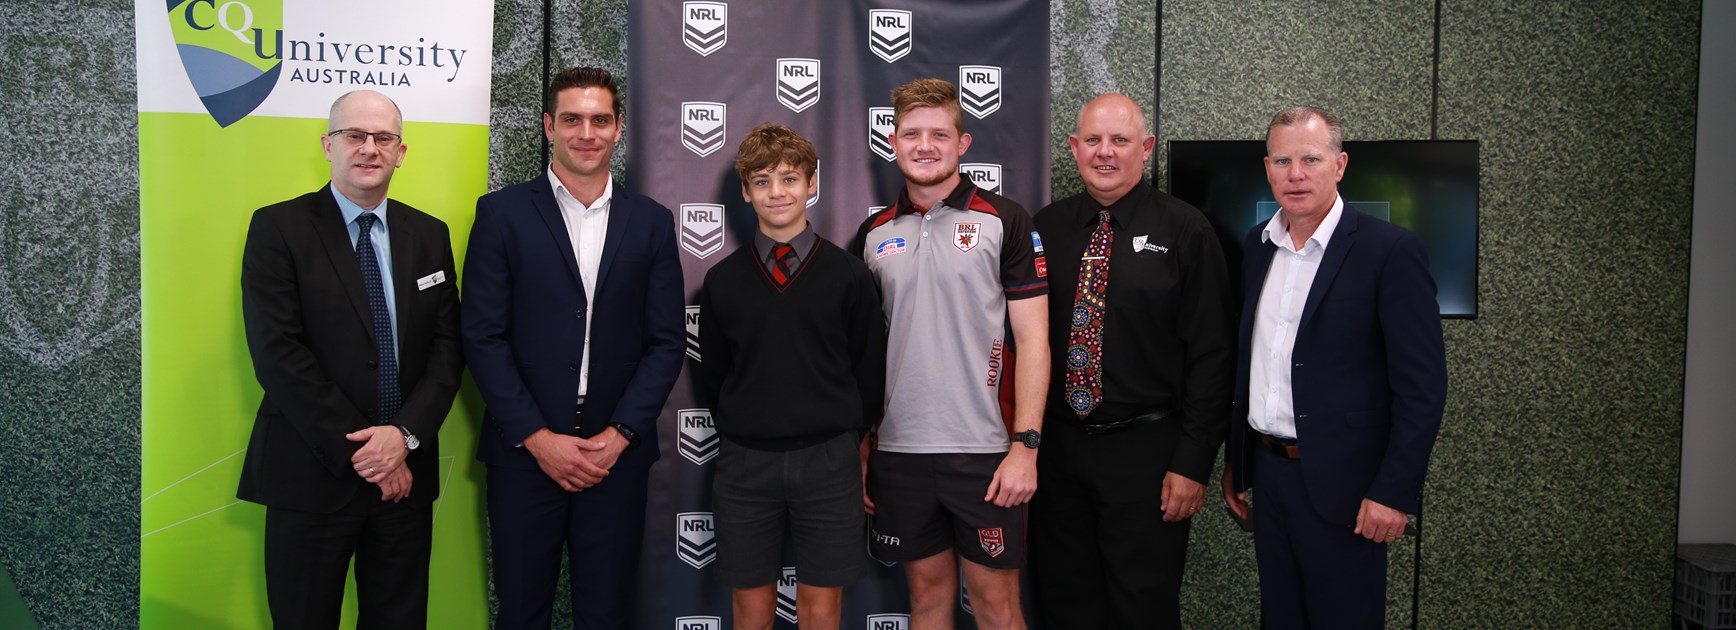 NRL Officiating Partners with CQUni